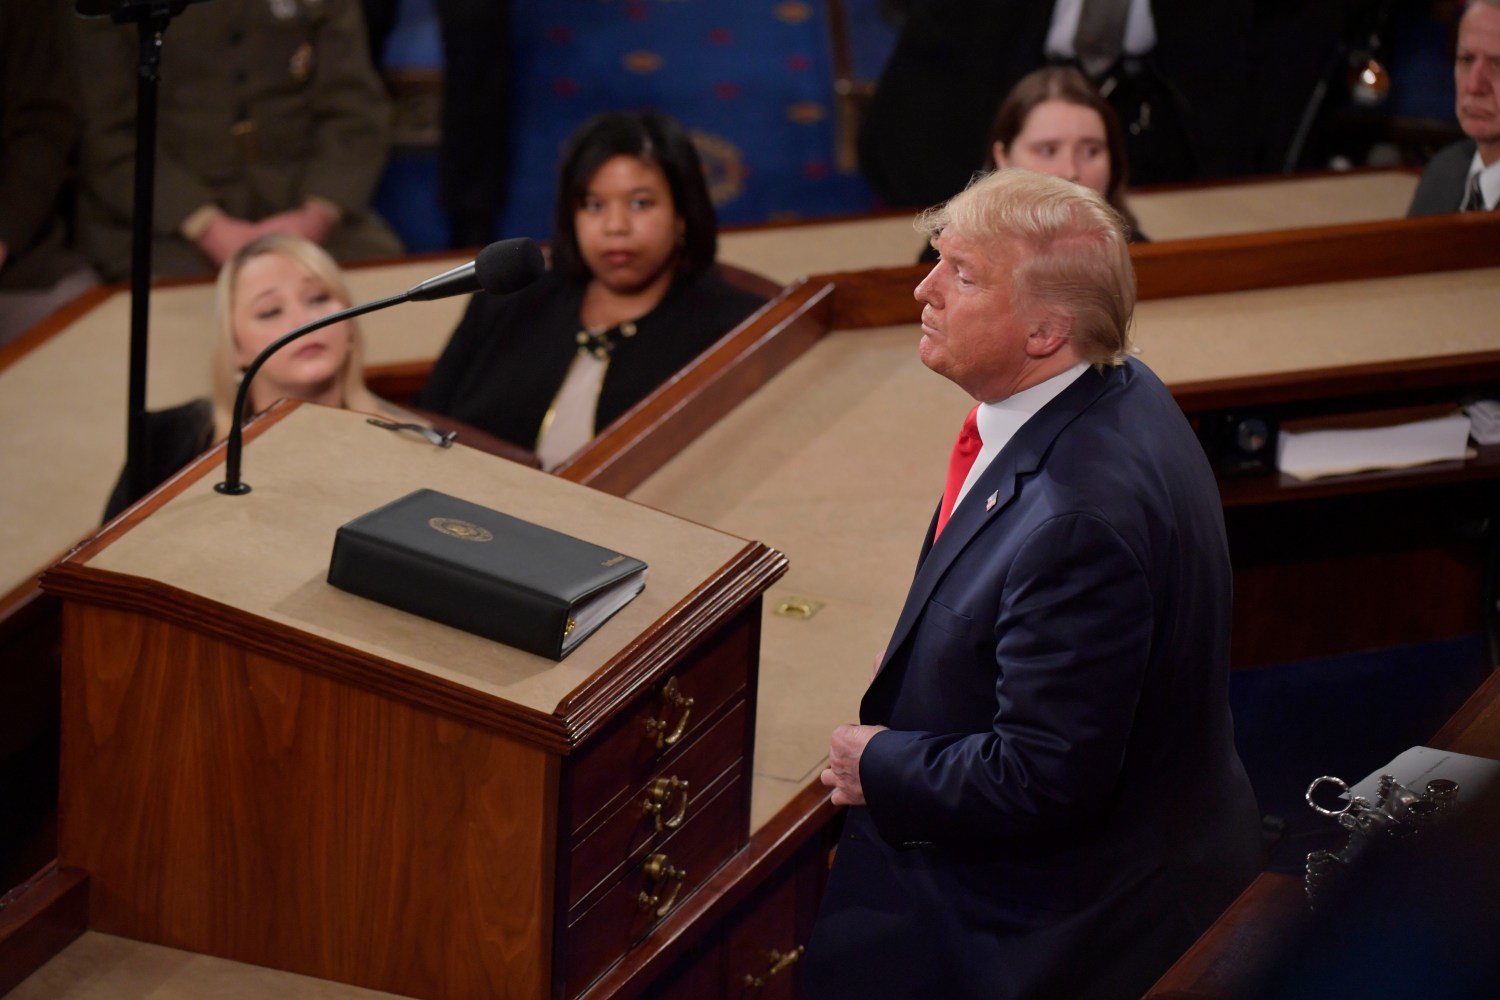 Feb 4, 2020; Washington, DC, USA;  President Donald J. Trump delivers the State of the Union address from the House chamber of the United States Capitol in Washington. Mandatory Credit: Jack Gruber-USA TODAY